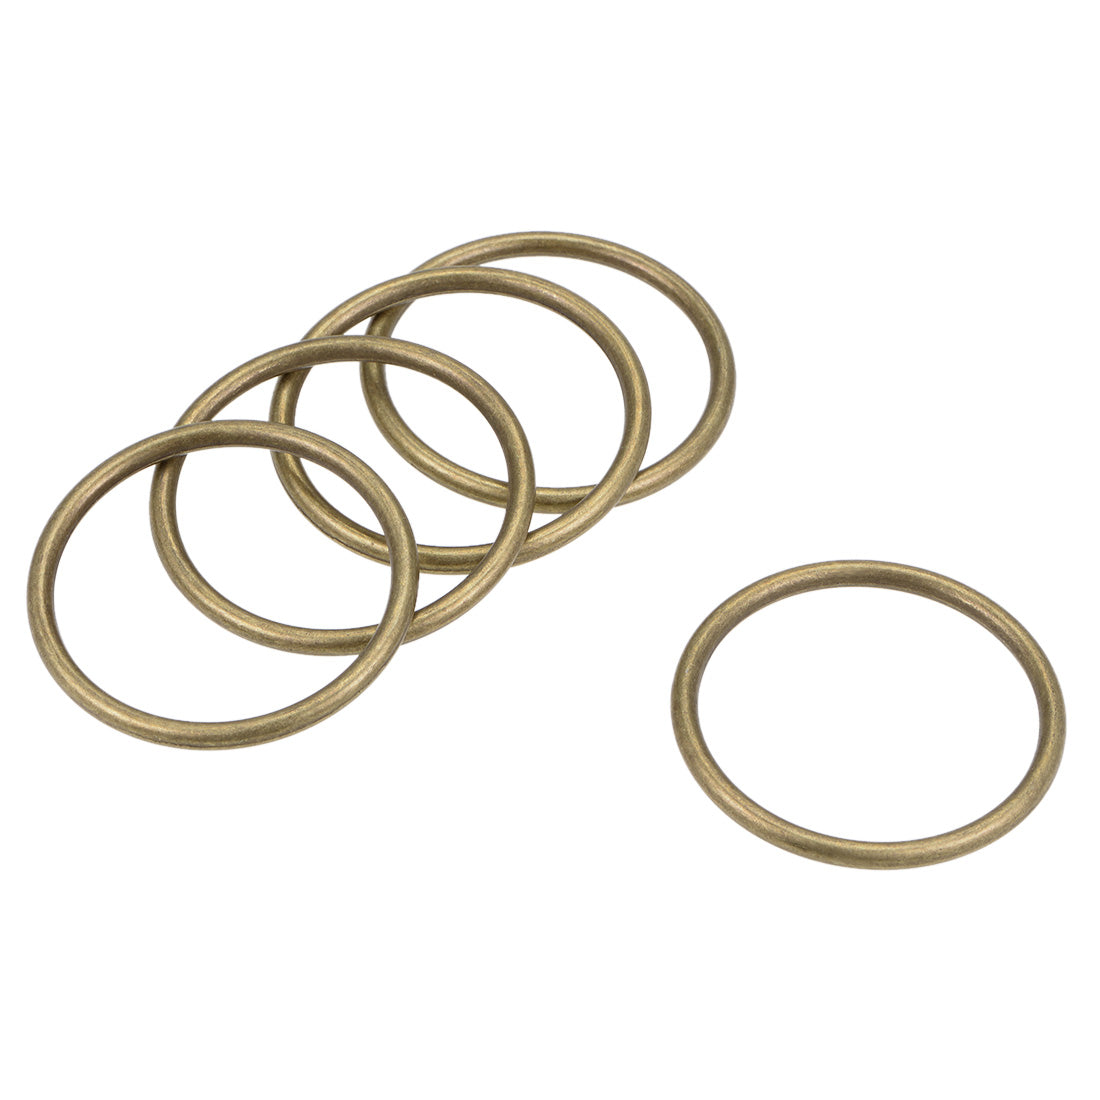 uxcell Uxcell O Ring Buckle 35mm(1.4") ID 3mm Thickness Zinc Alloy O-Rings for Hardware Bags Belts Craft DIY Accessories, Bronze Tone 5pcs